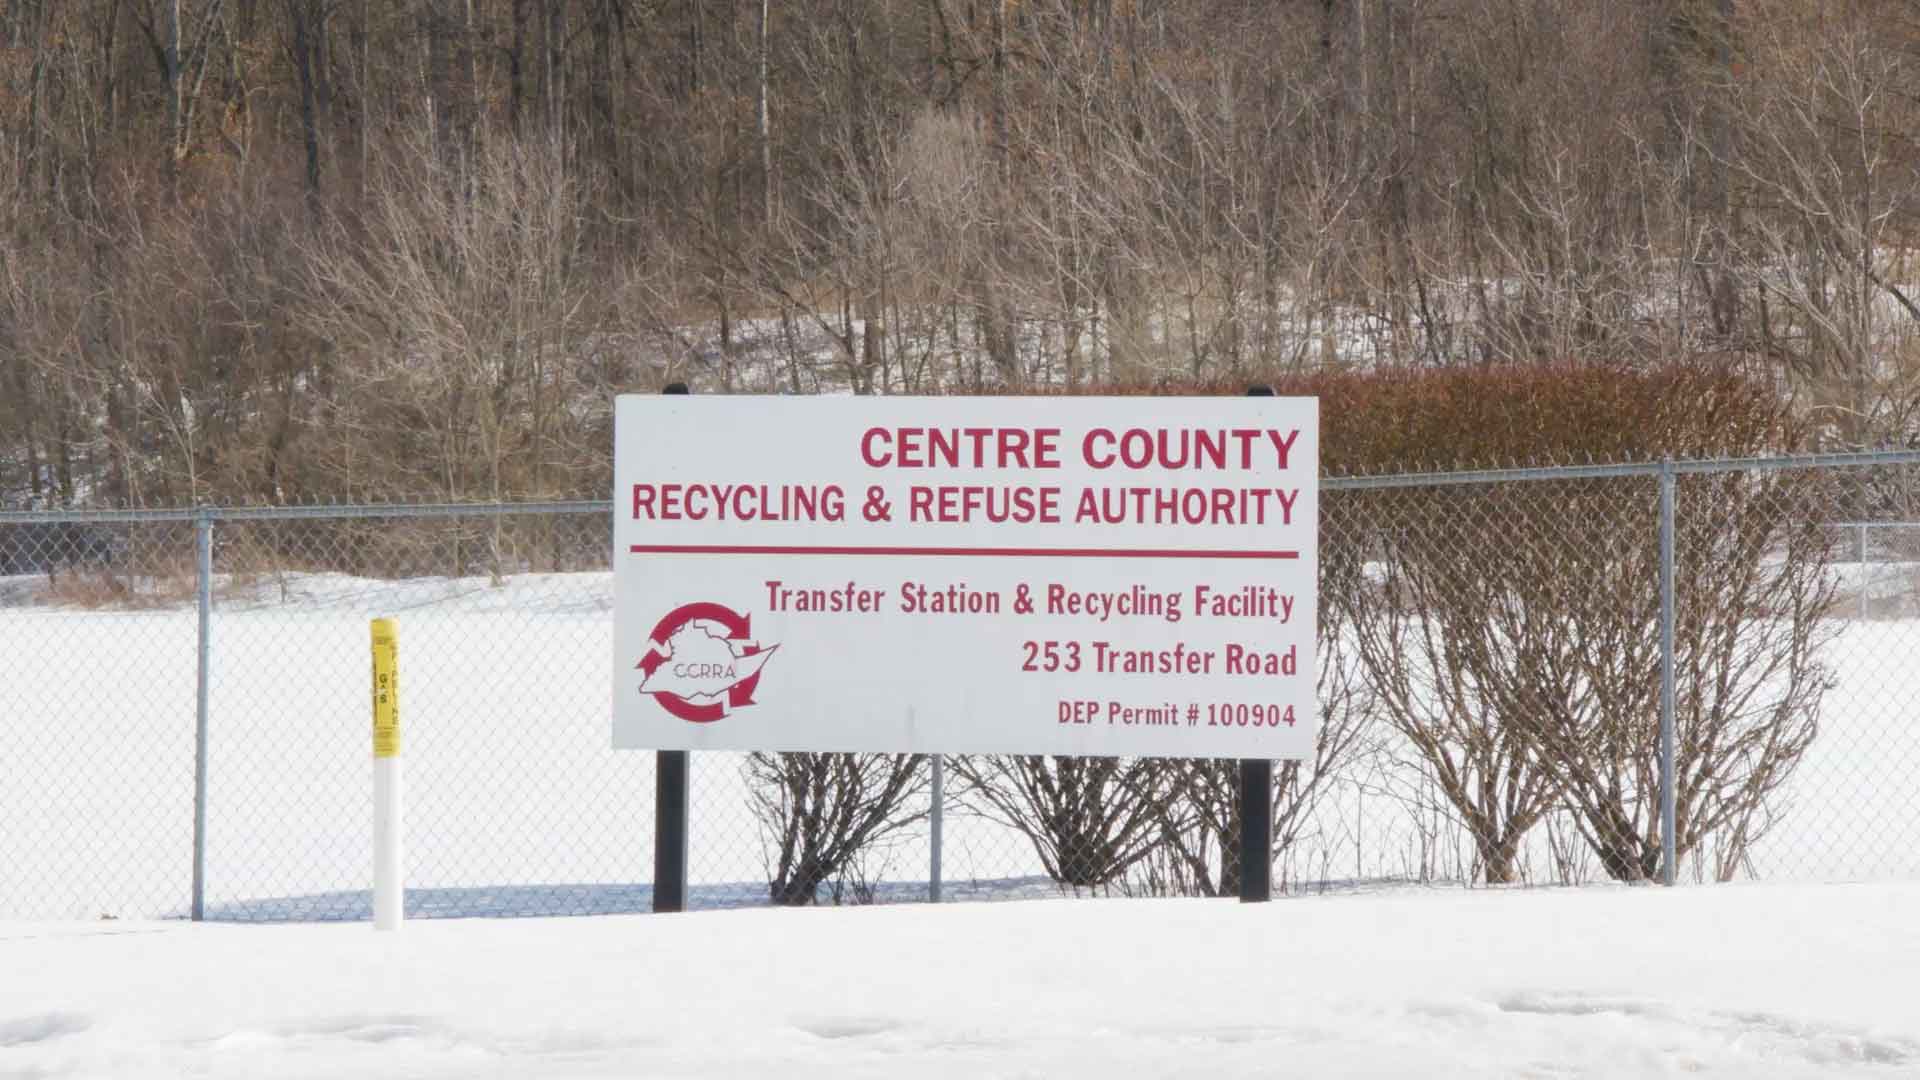 Centre County Recycling and Refuse Authority signage